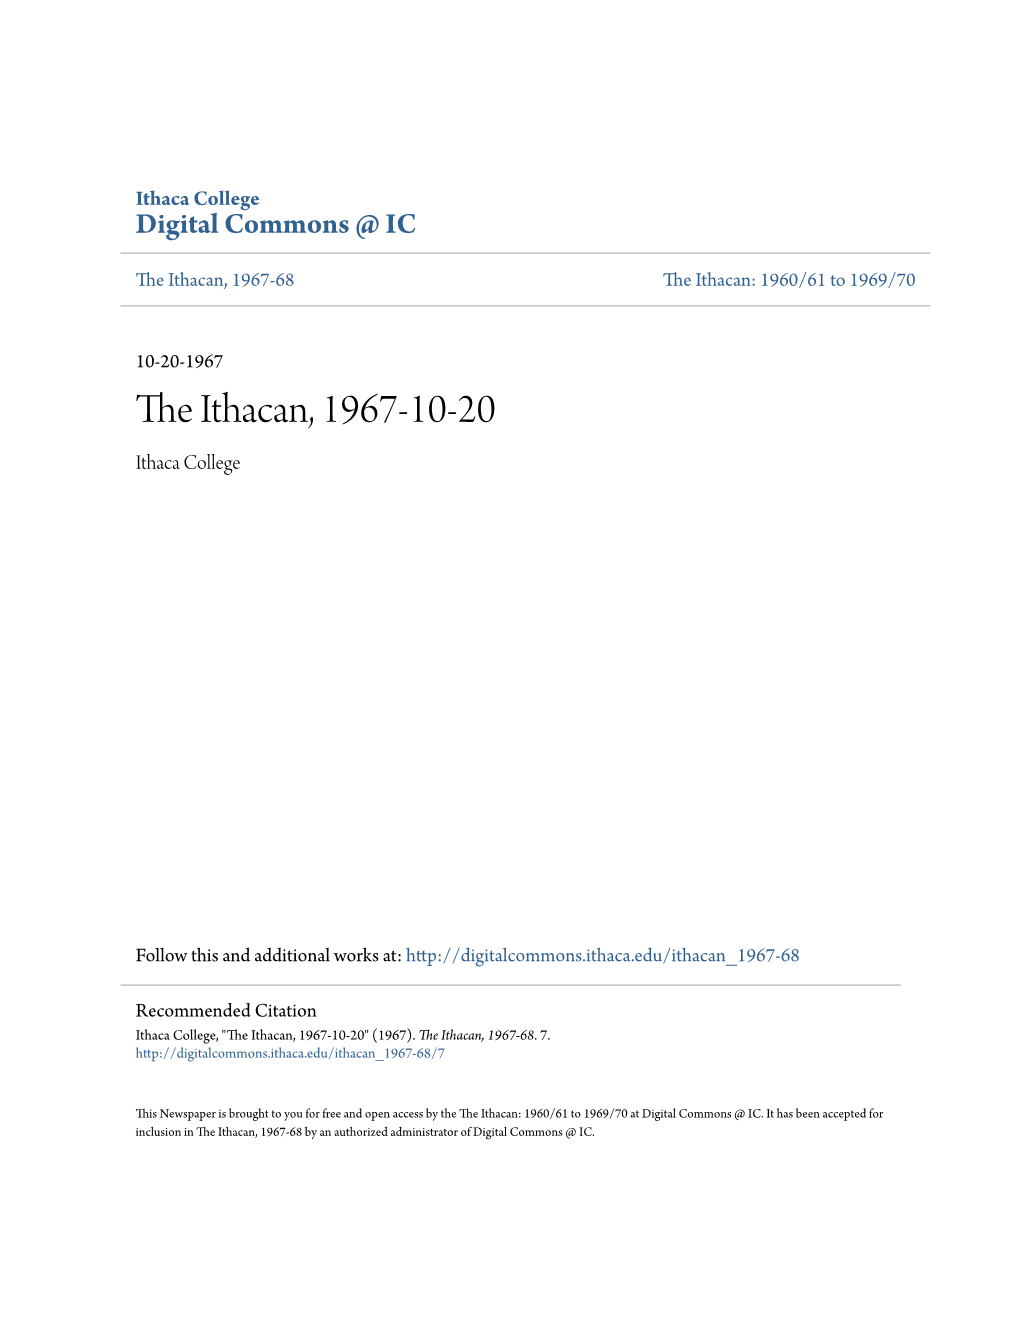 The Ithacan, 1967-10-20